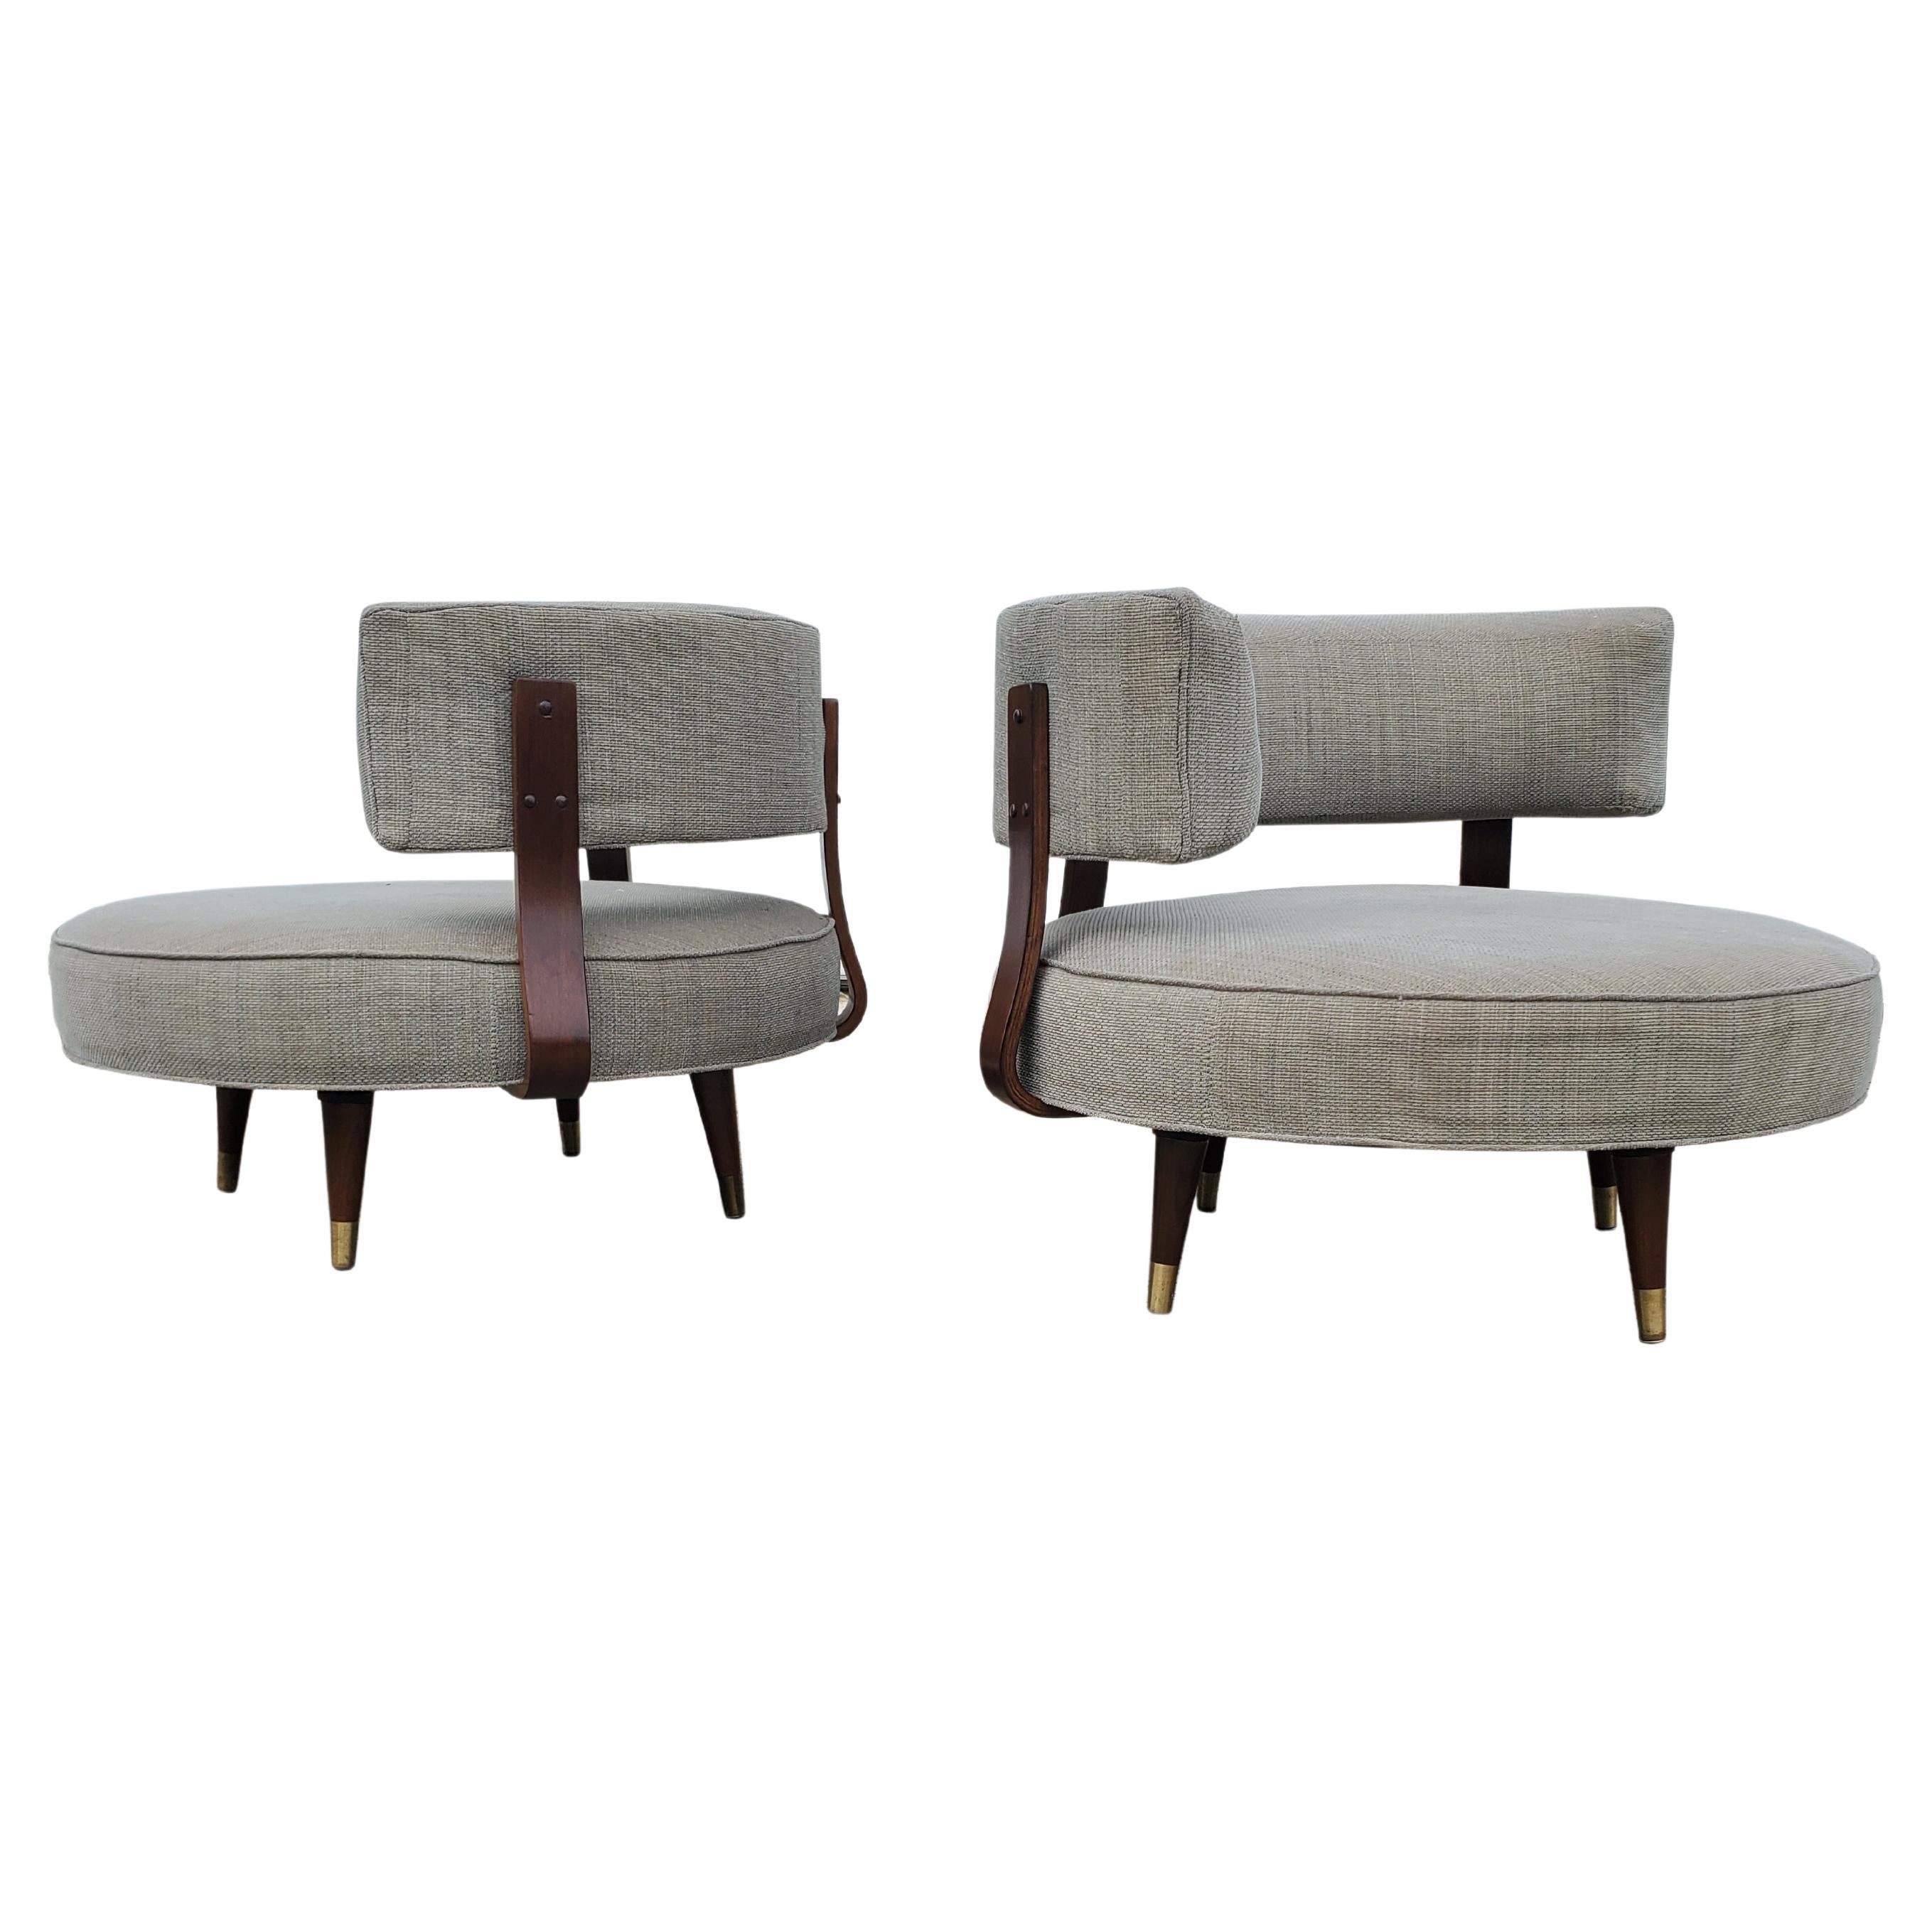 Pair of Adrian Pearsall for Craft Associates Large Round Swivel Chairs 1426-RO